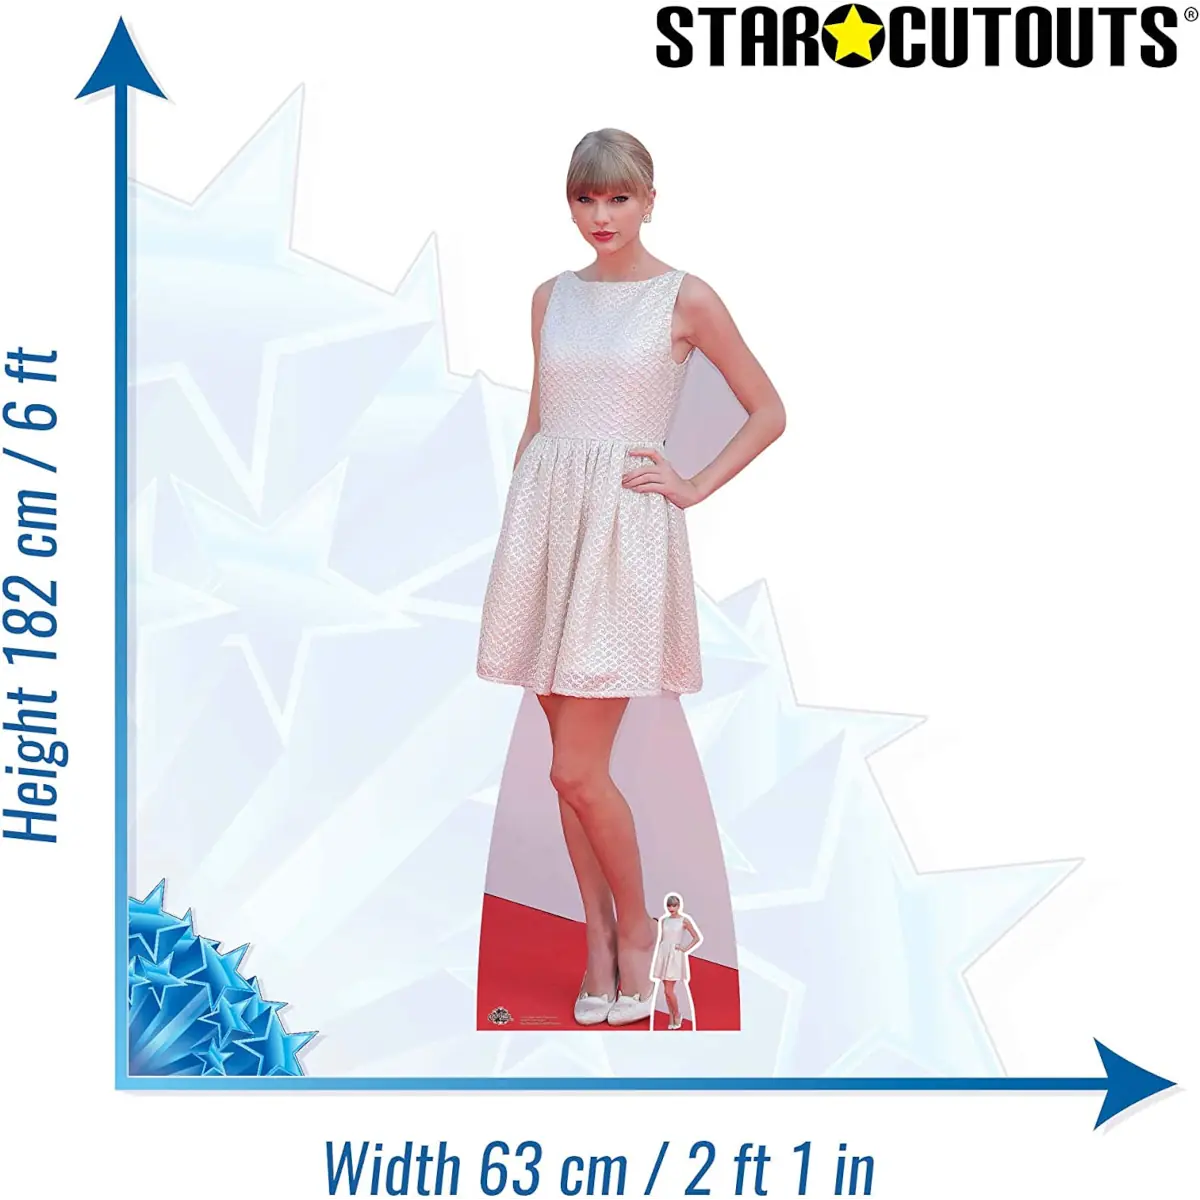 Taylor Swift 'White Dress' (American Singer/Songwriter) Lifesize + Mini Cardboard  Cutout / Standee - Cutouts & Collectables